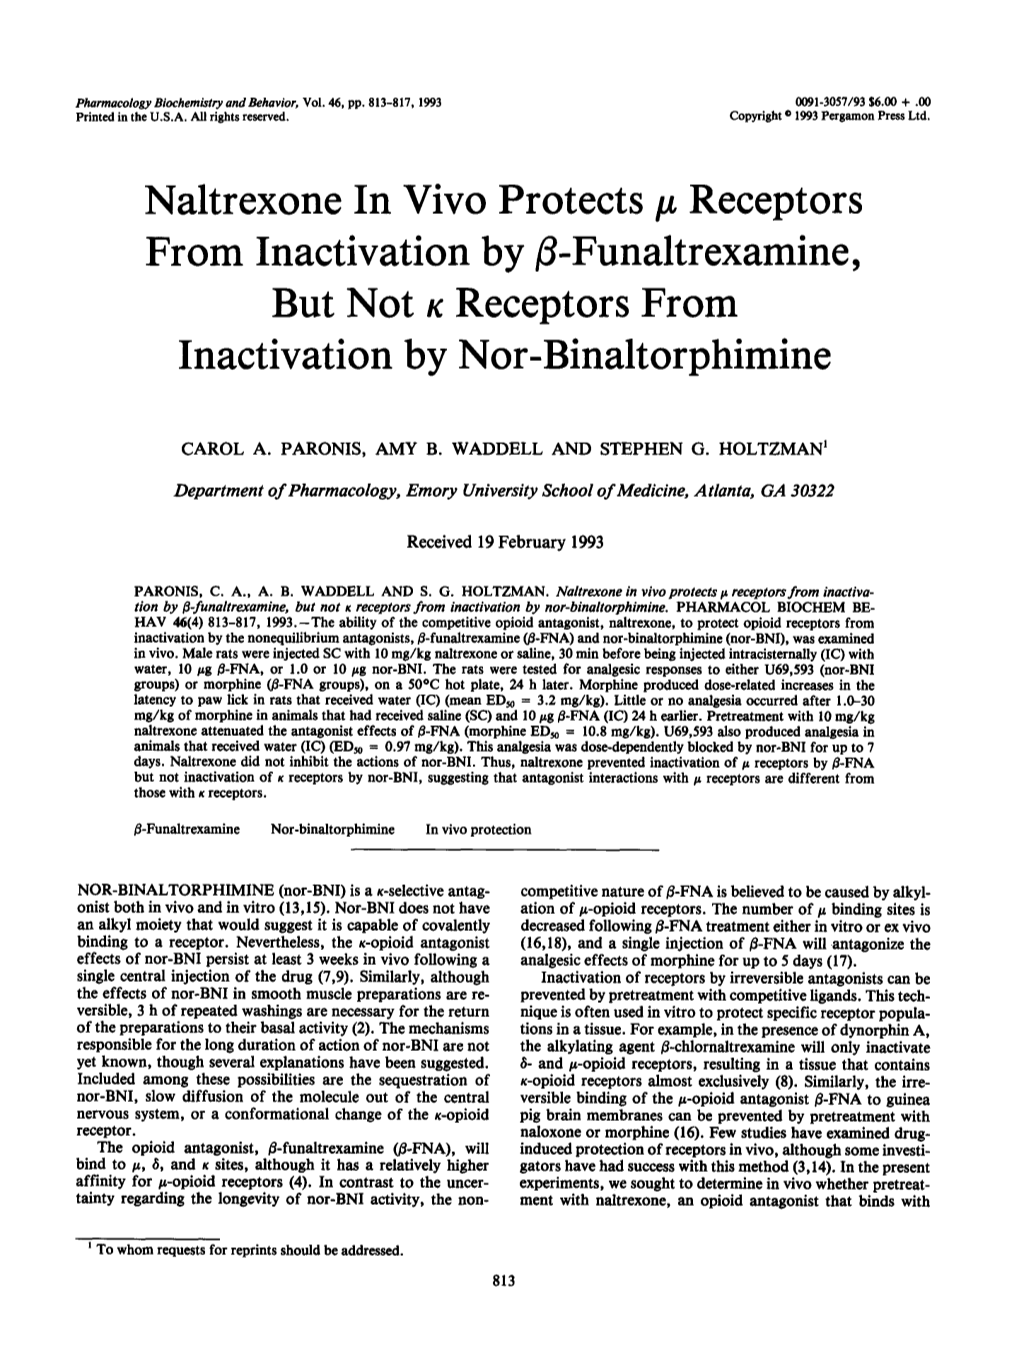 Naltrexone in Vivo Protects/ Receptors from Inactivation by B-Funaltrexamine, but Not R Receptors from Inactivation by Nor-Binaltorphimine